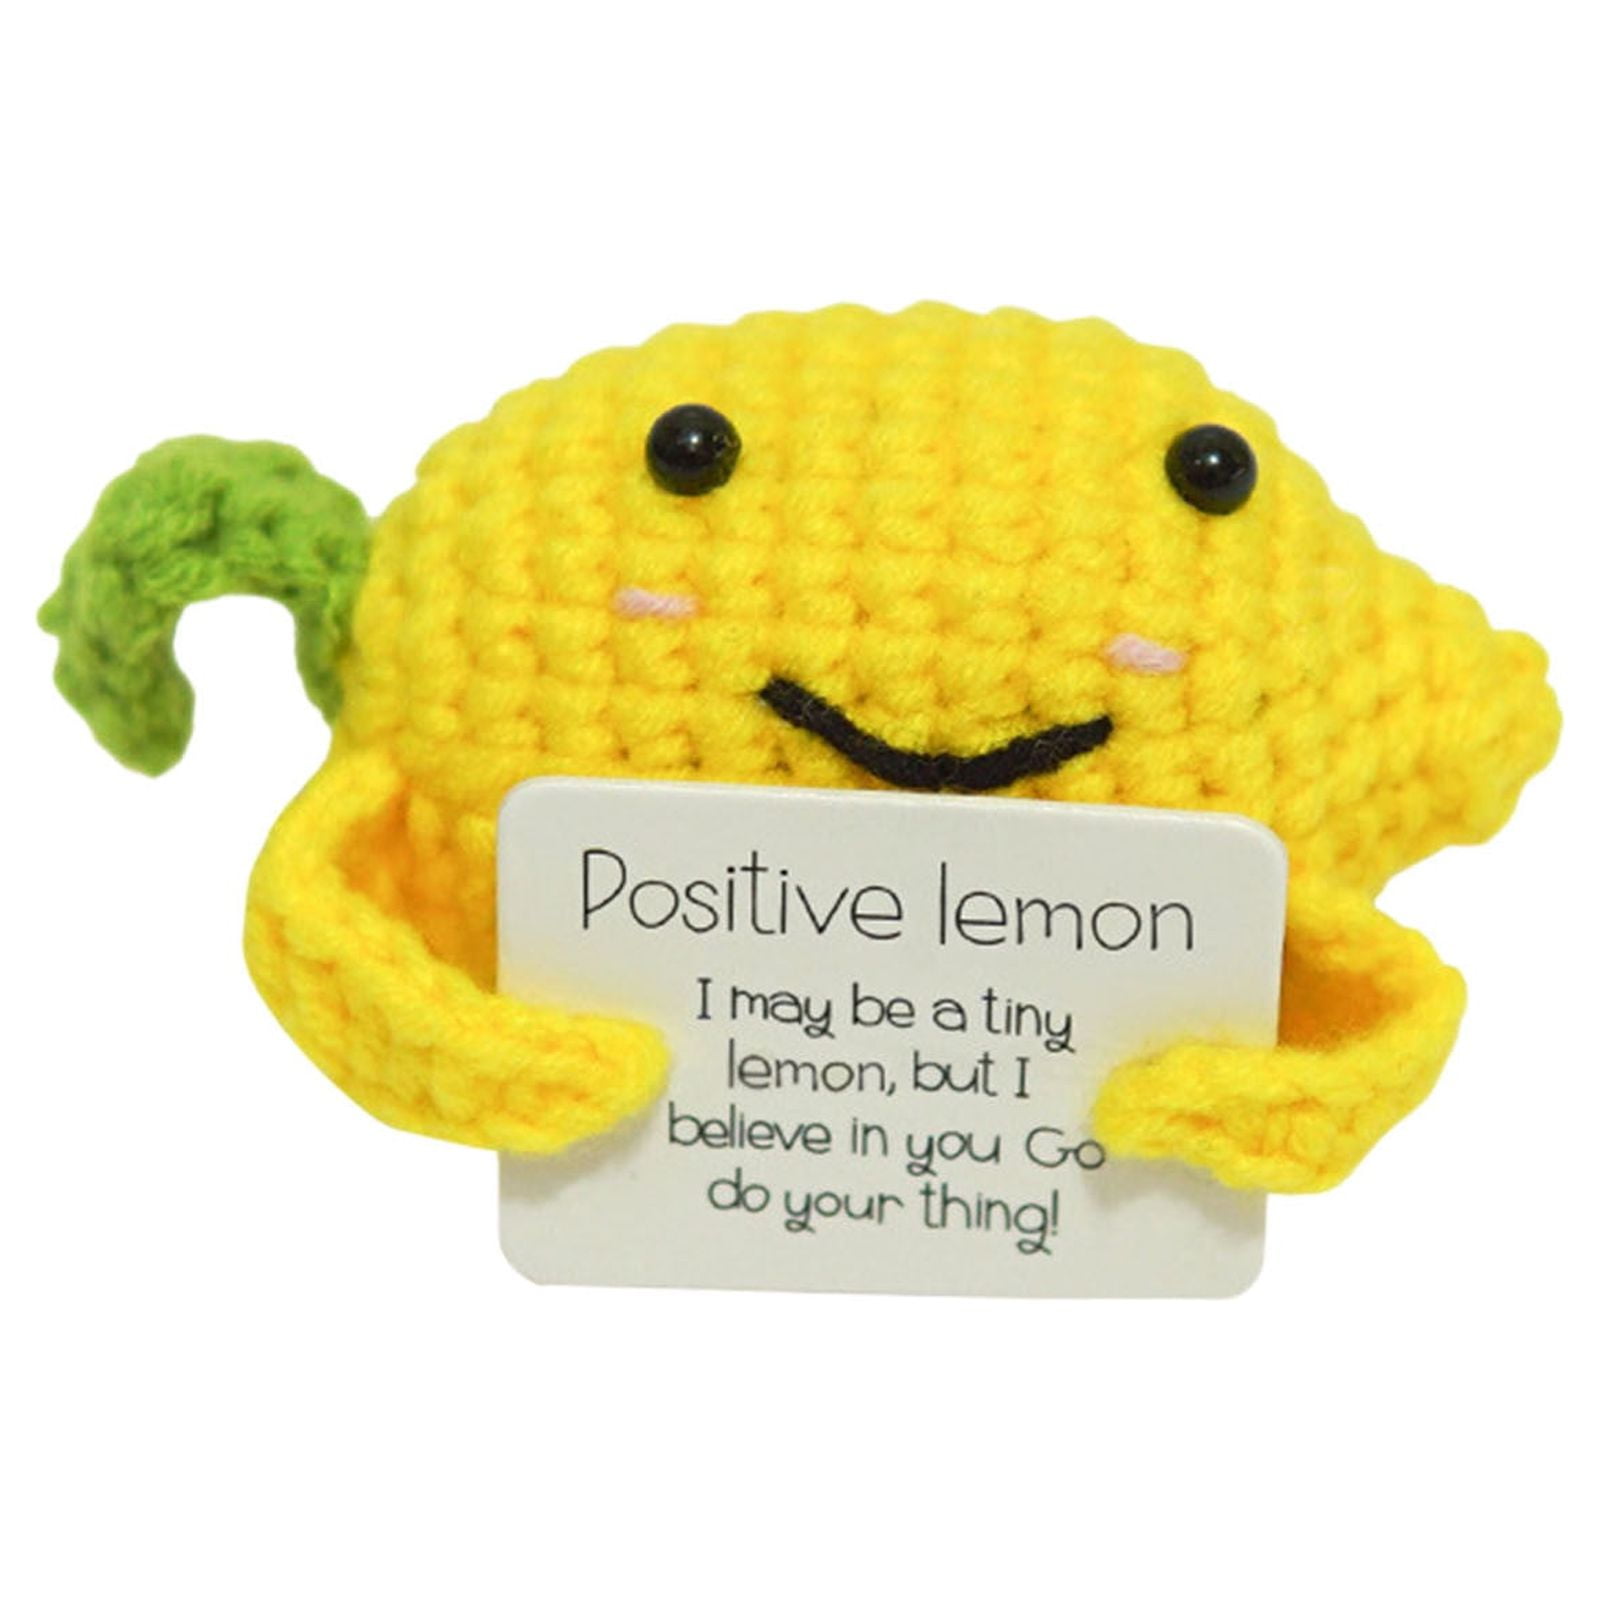  Coxolx Emotional Support Pickle, Positive Pickle Plush Positive  Potato, Handmade Funny Pickle Gift, Knitted Pickle Stuffed Pickle Cucumber  Knitting Doll, Best Gifts for Friends (1PC) : Toys & Games